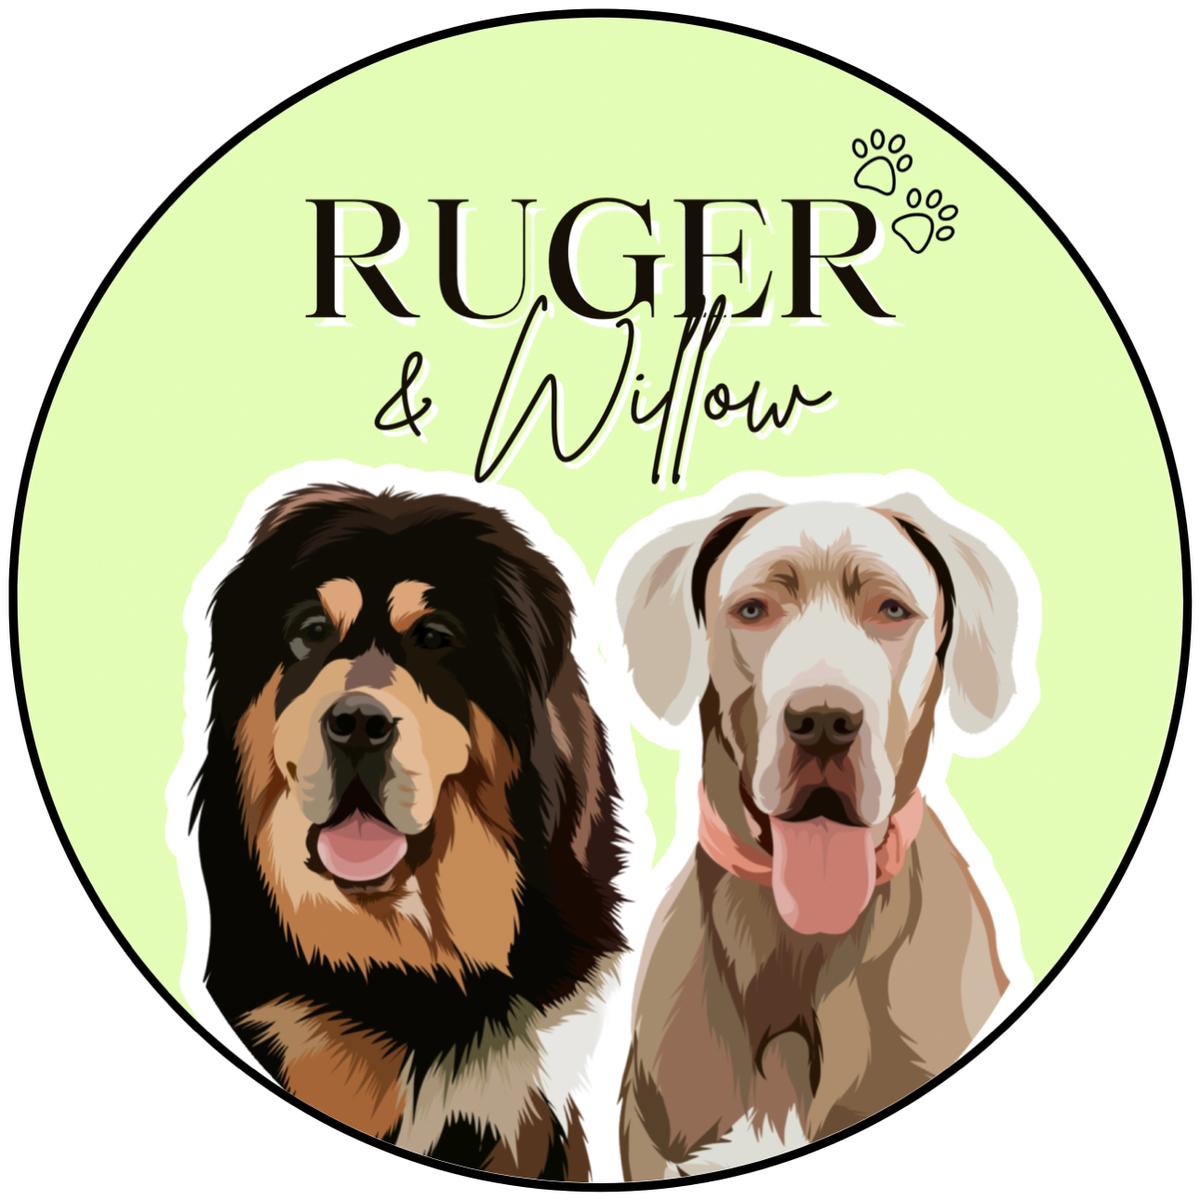 Ruger & Willow 's images